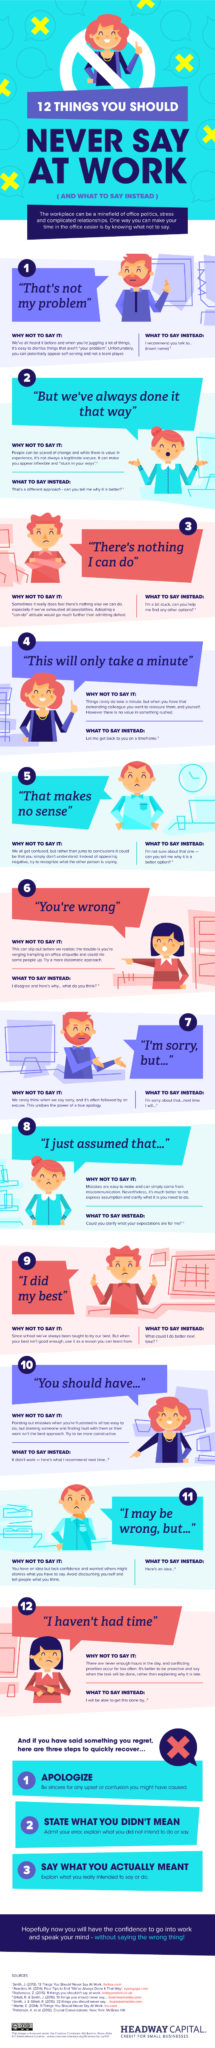 infographic about work